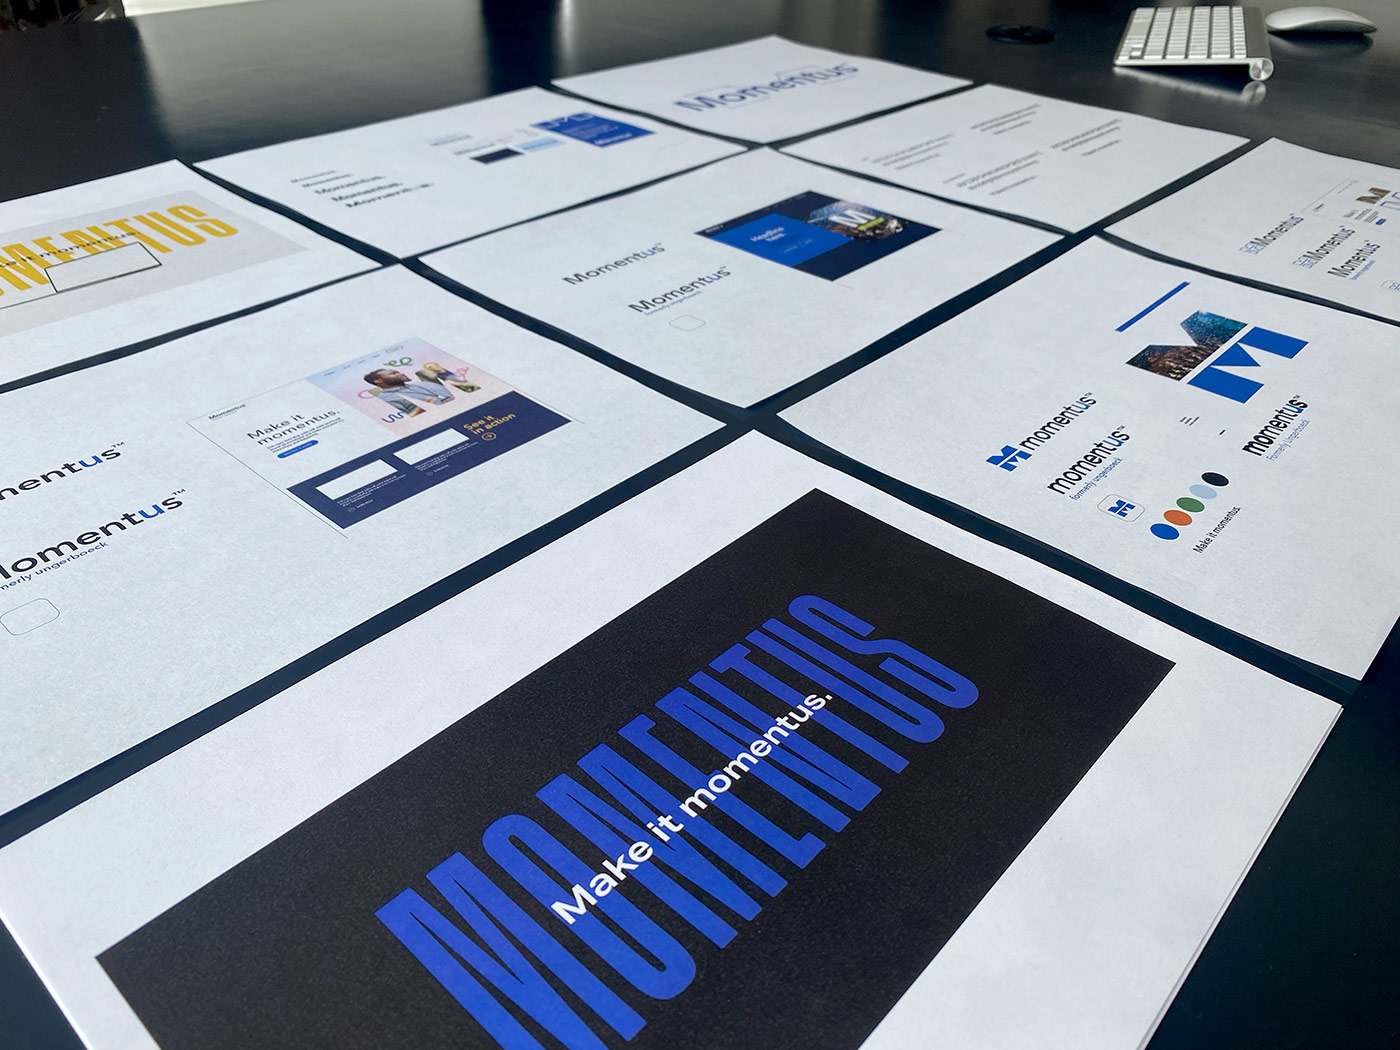 Design concepts of the Momentus brand, printed and laying across the table.